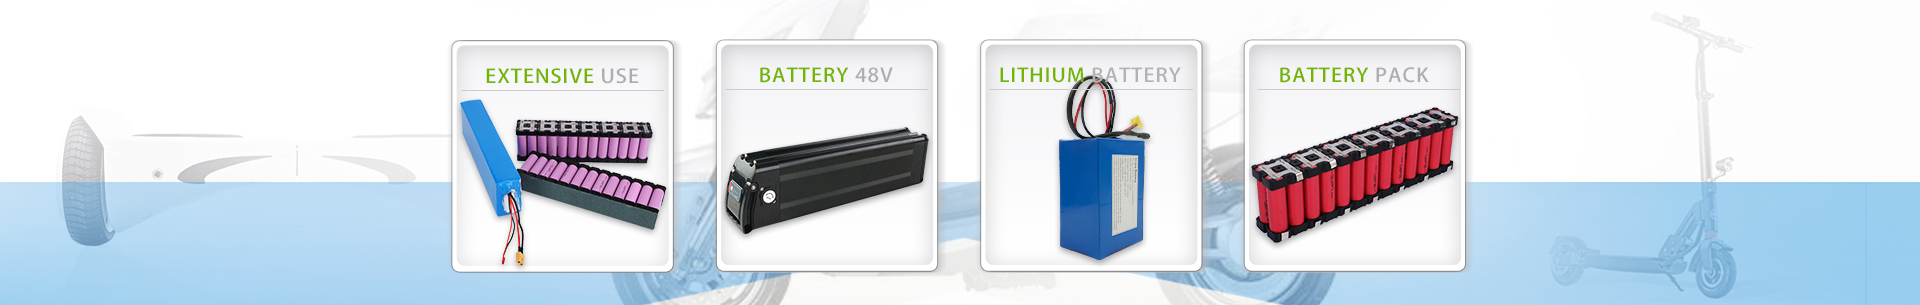 How to use polymer lithium ion battery correctly?